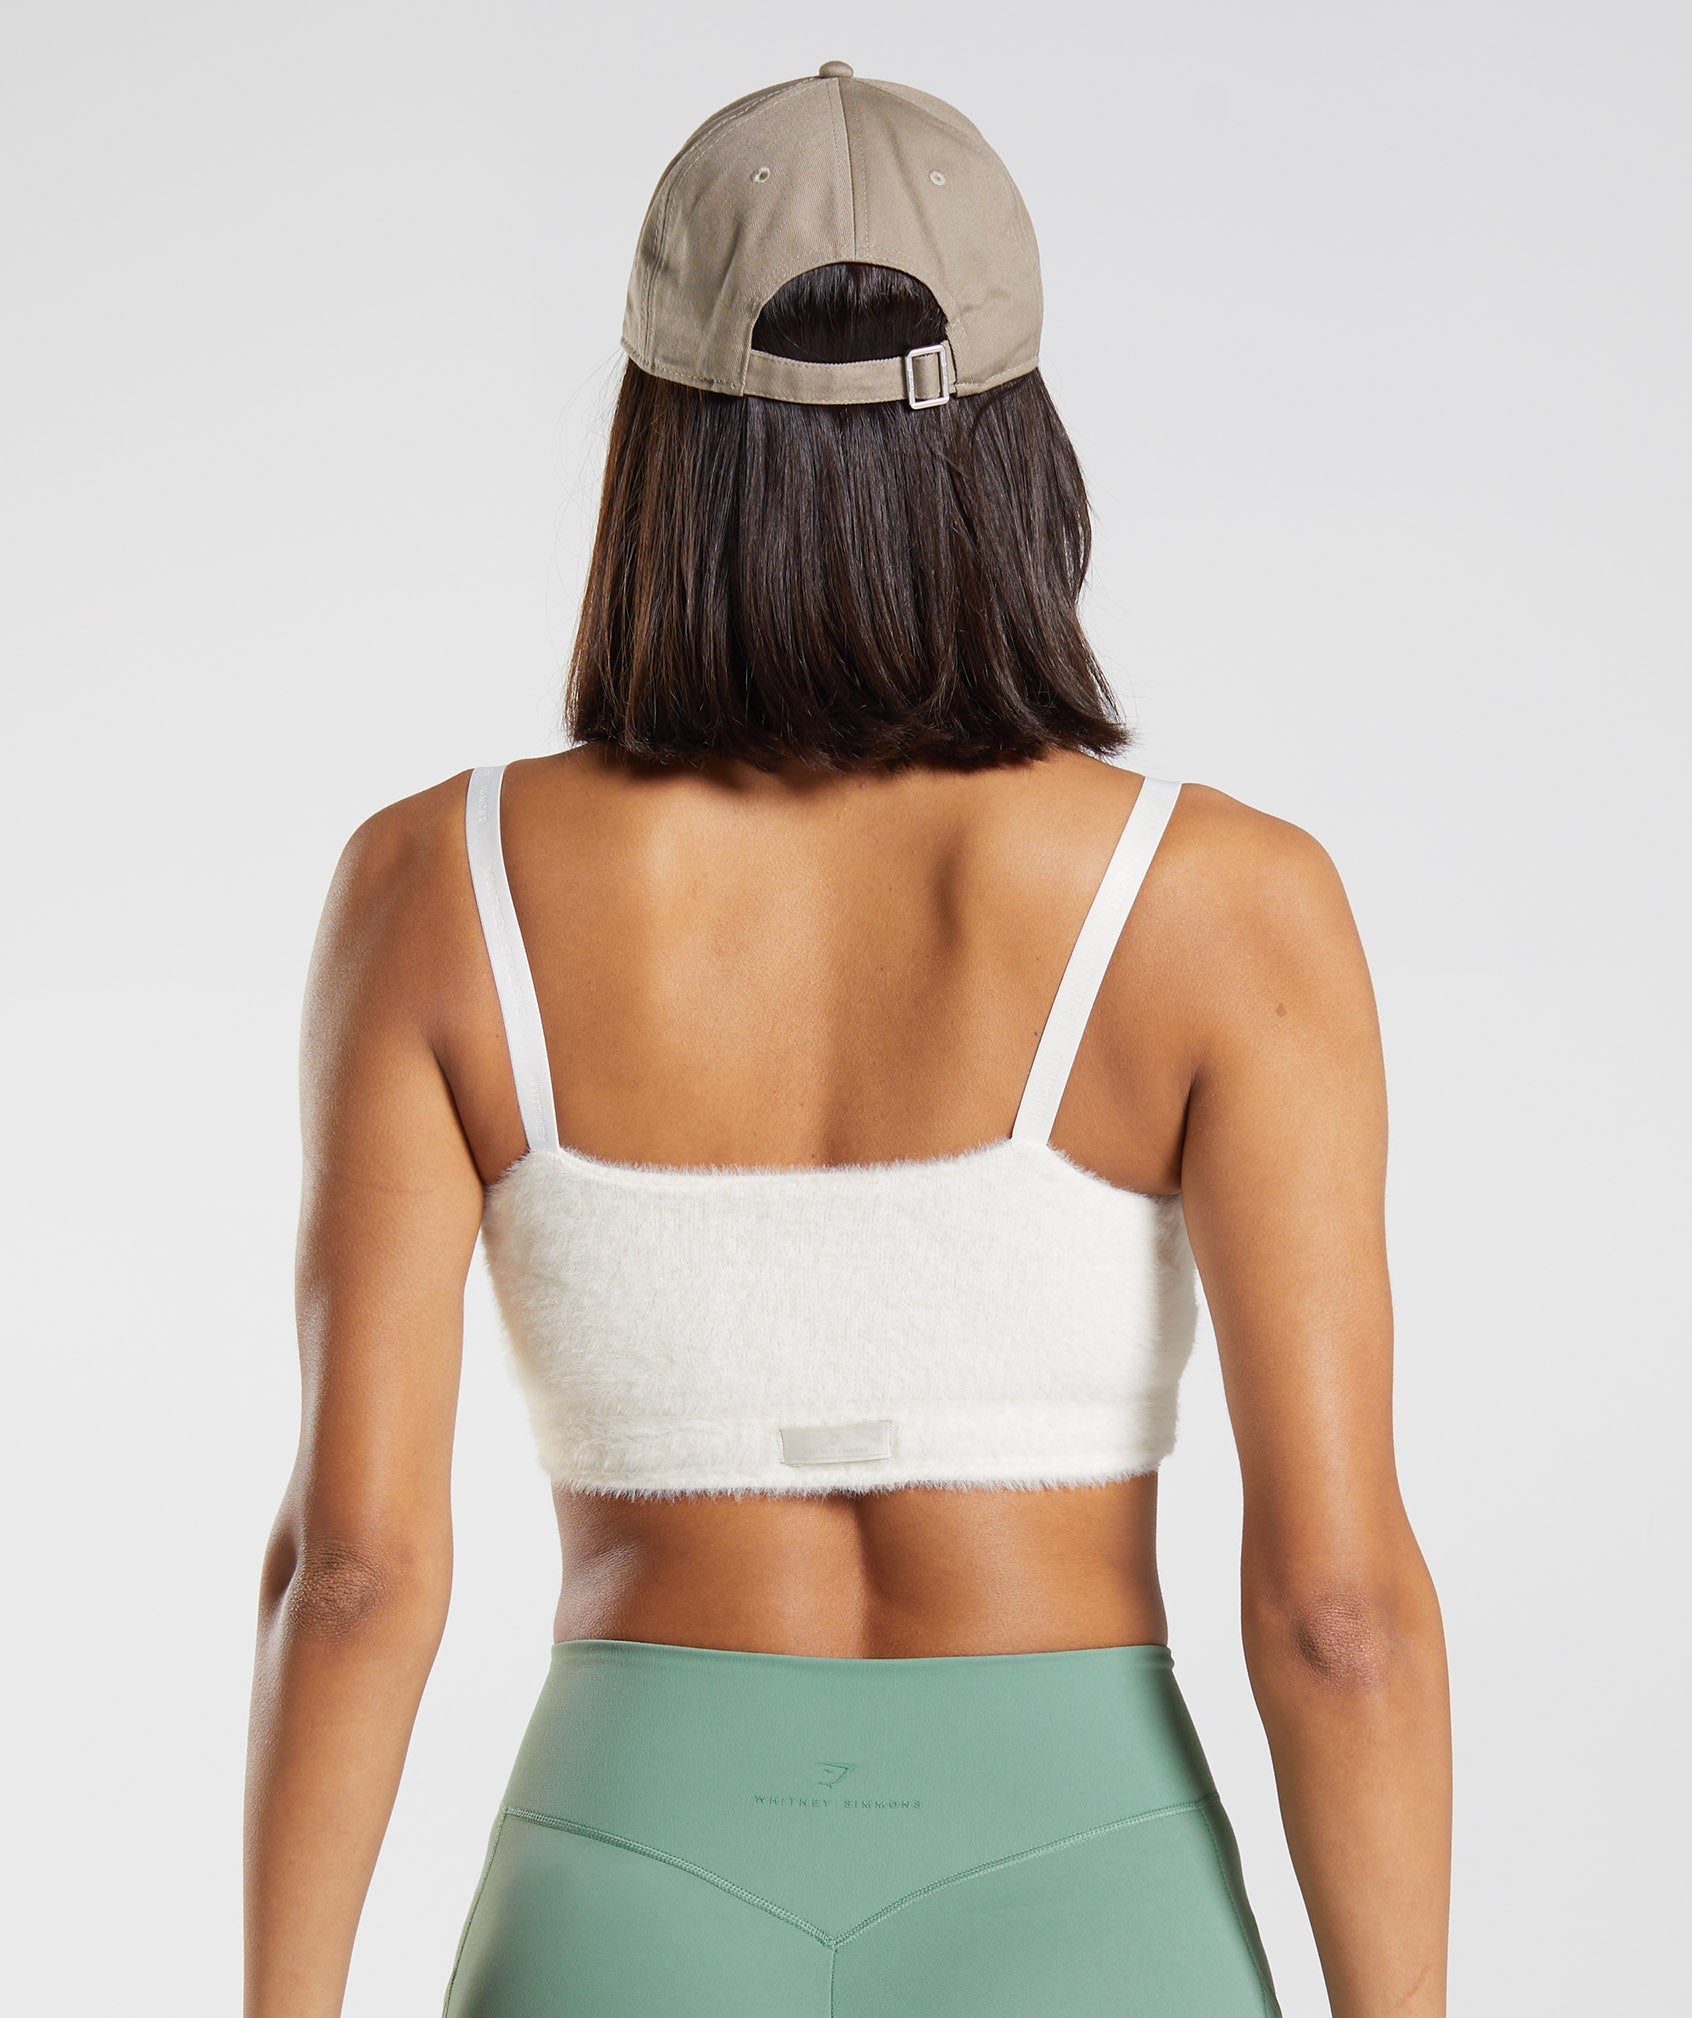 Gymshark, Tops, Whitney Simmons X Gymshark Long Sleeve Crop Top 2  Unbleached Size Small